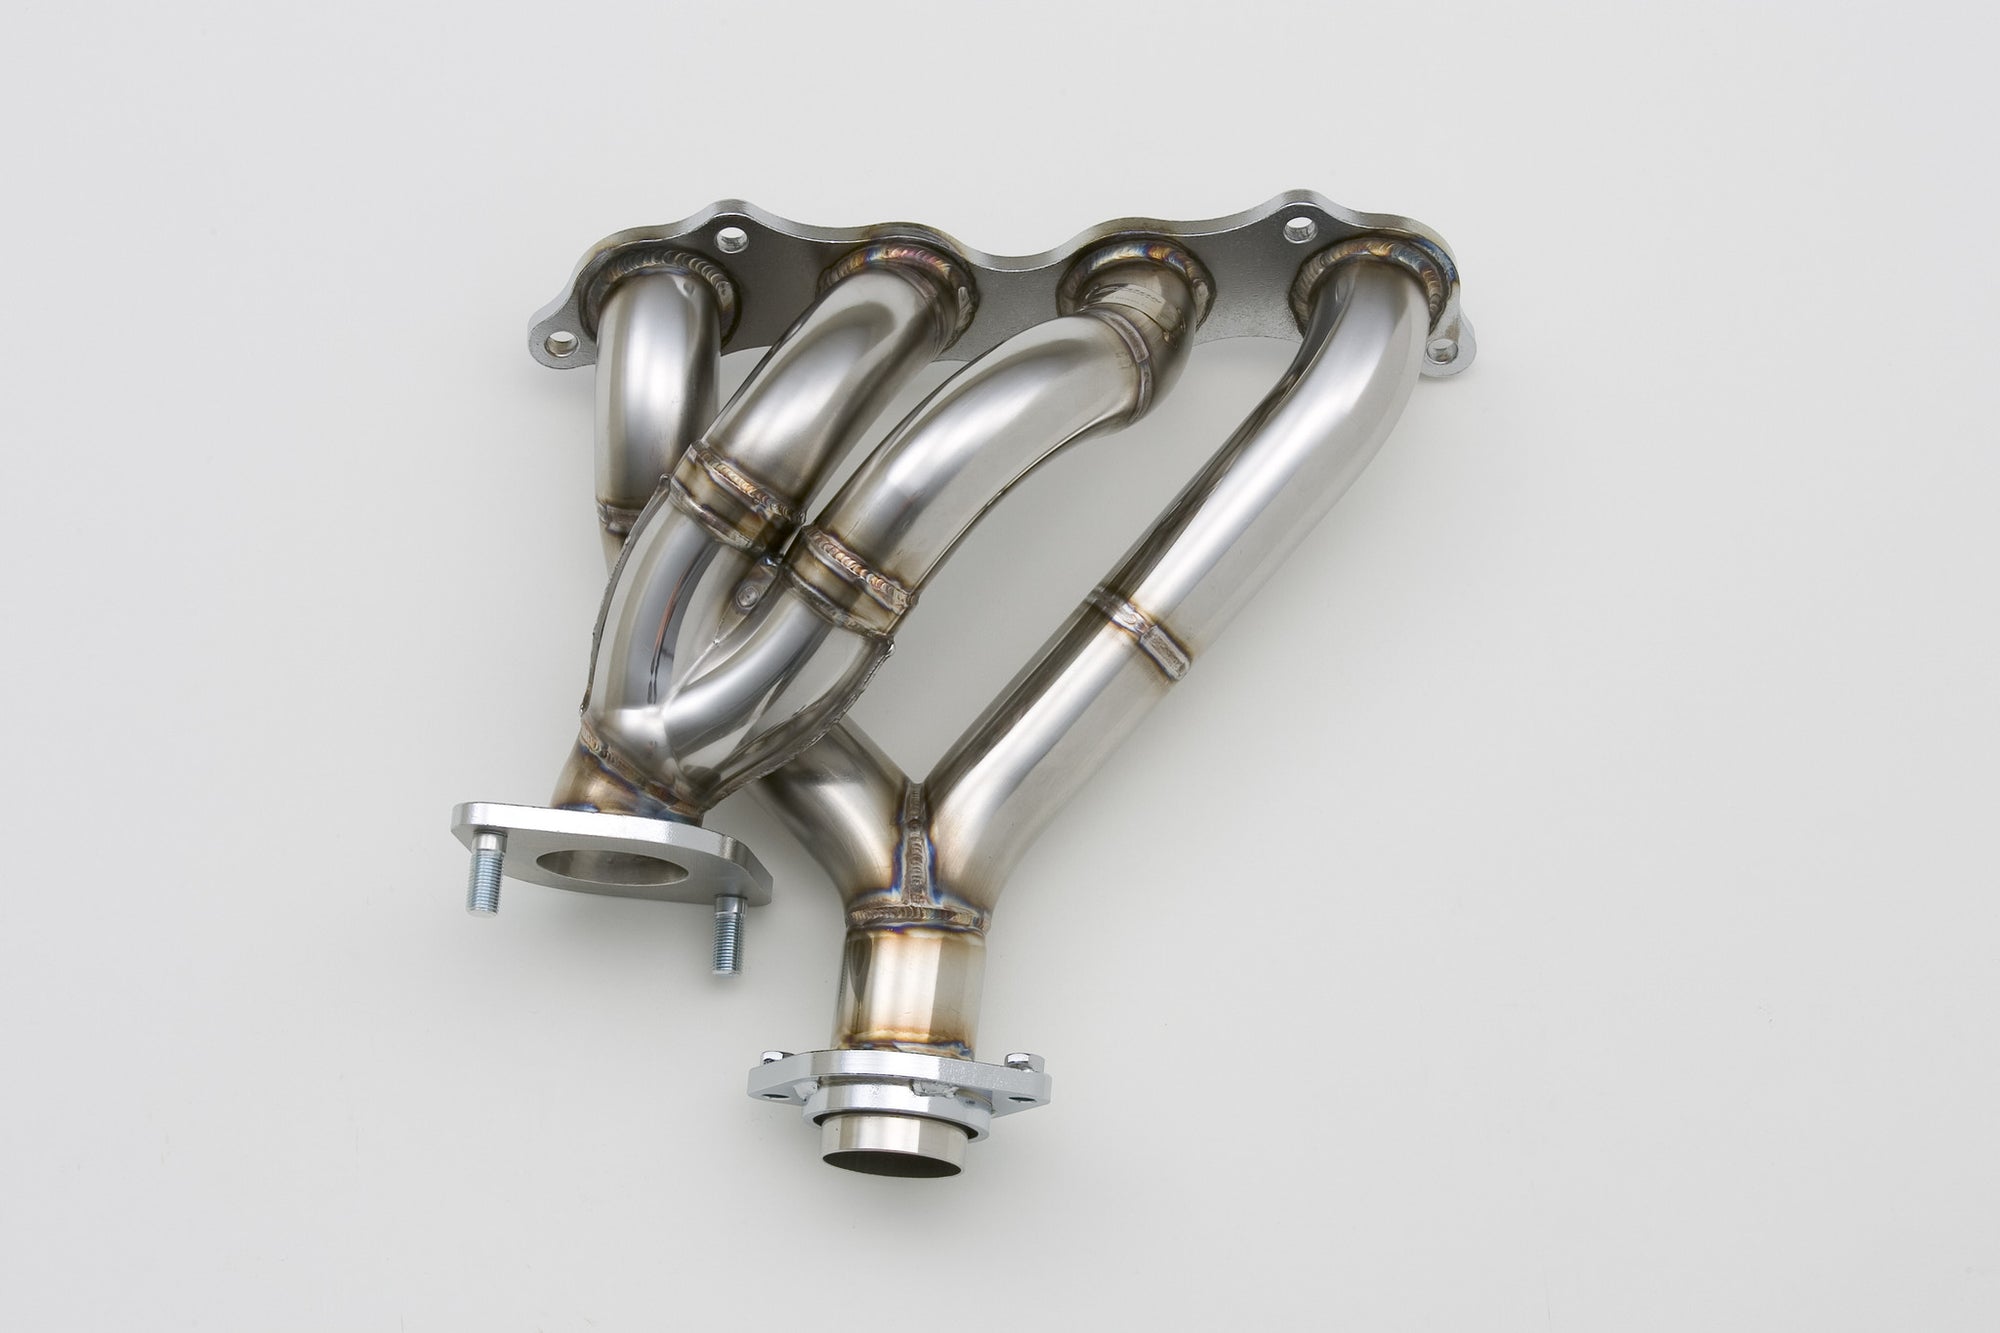 SPOON 4 in 2 EXHAUST MANIFOLD For HONDA CIVIC FD2 18100-FD2-000